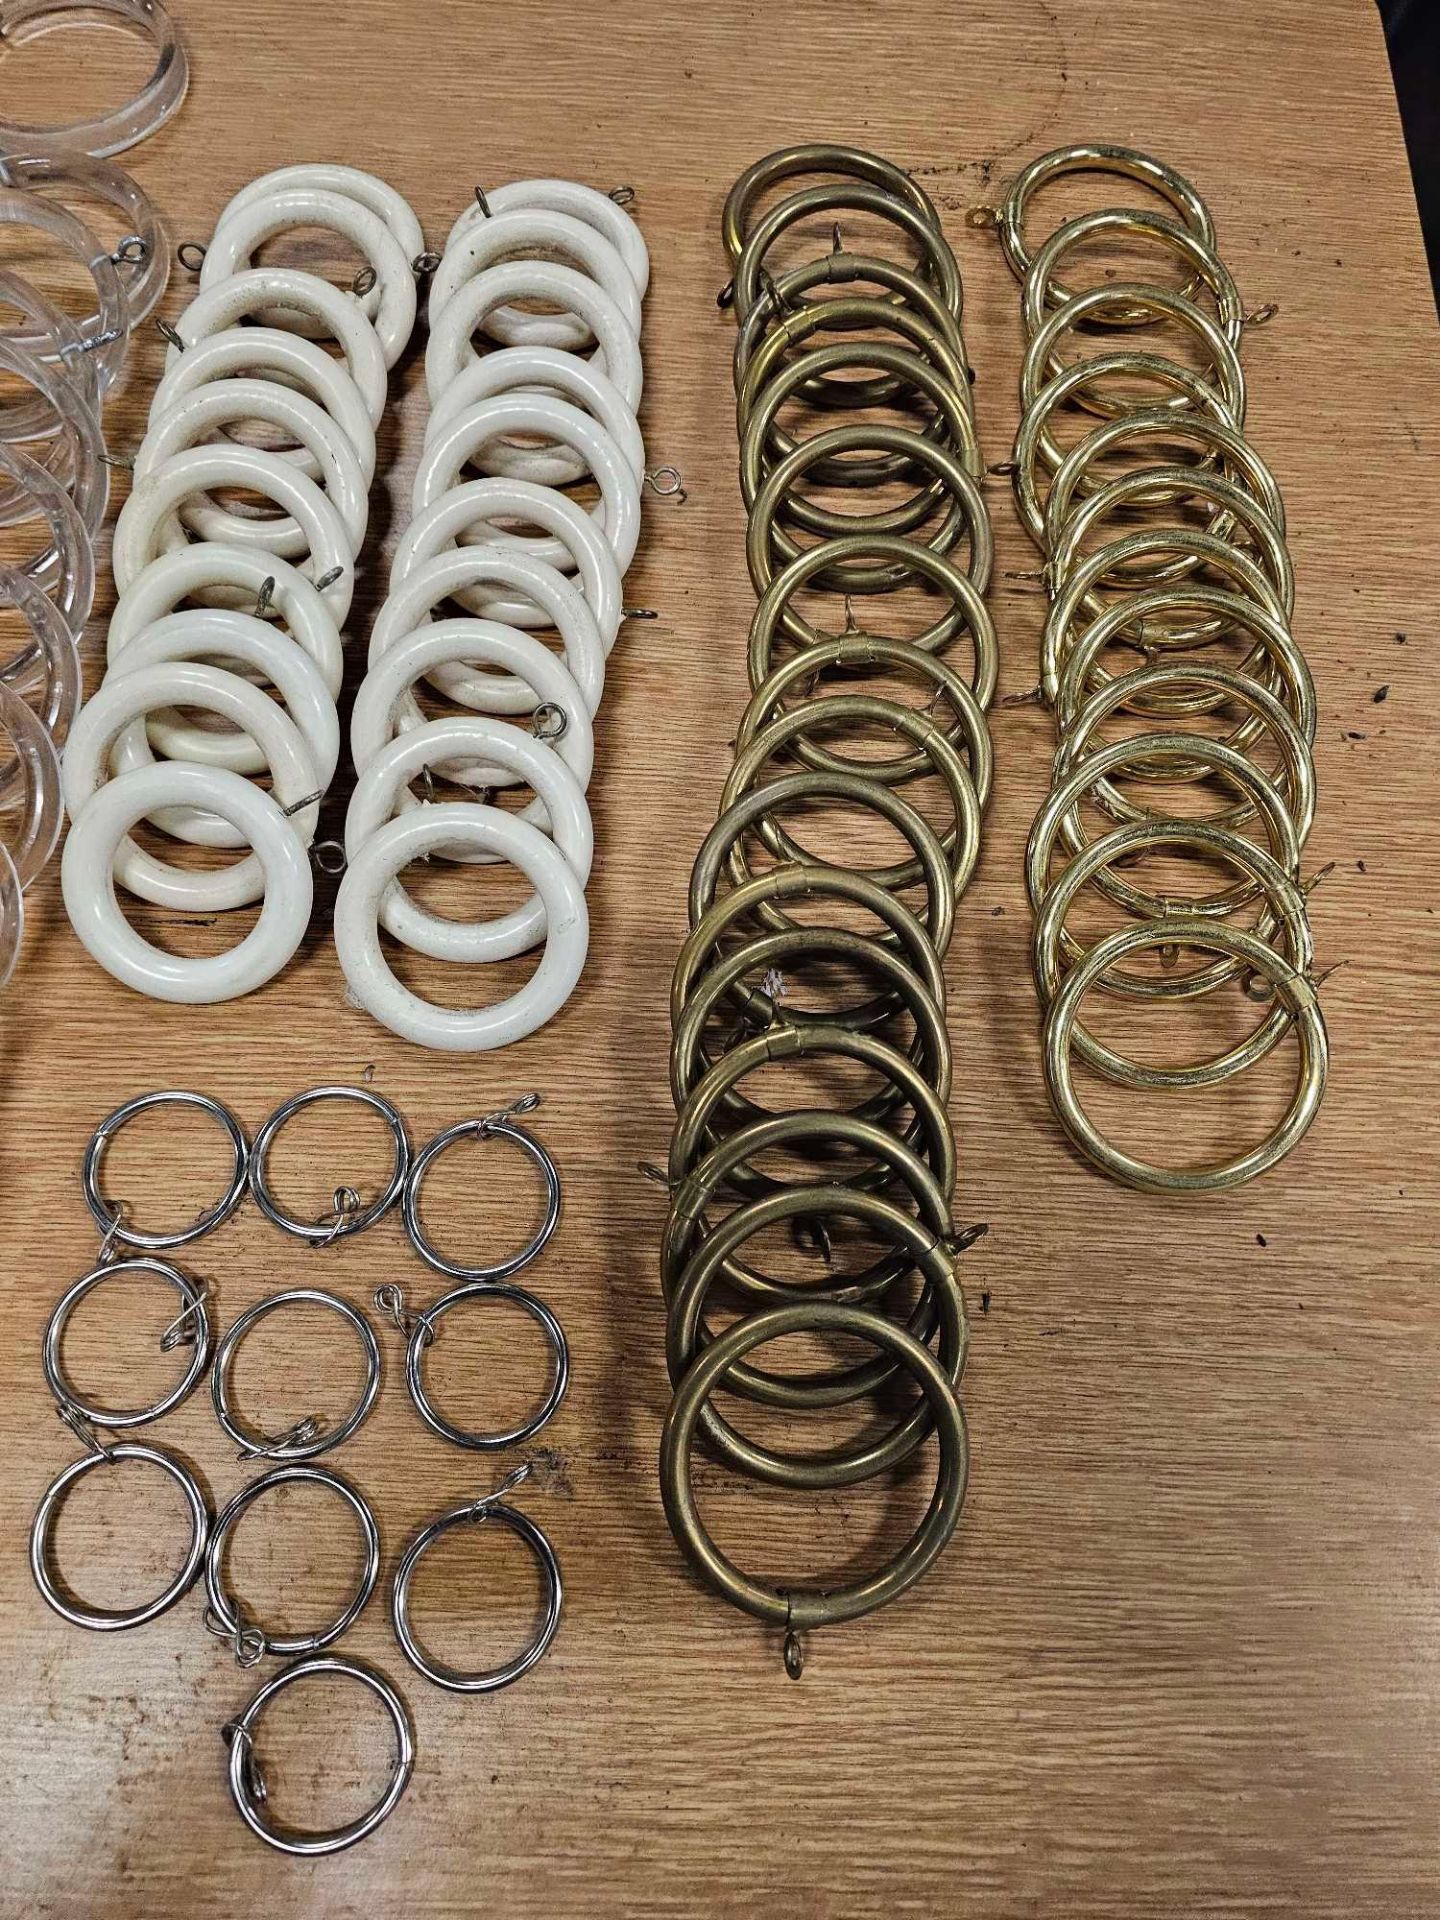 Assortment Of Curtain Rings Plastic x 97 Bronze x 16 Gold x 12 Wood White x 20 Chrome x 10 (Ref - Image 2 of 3